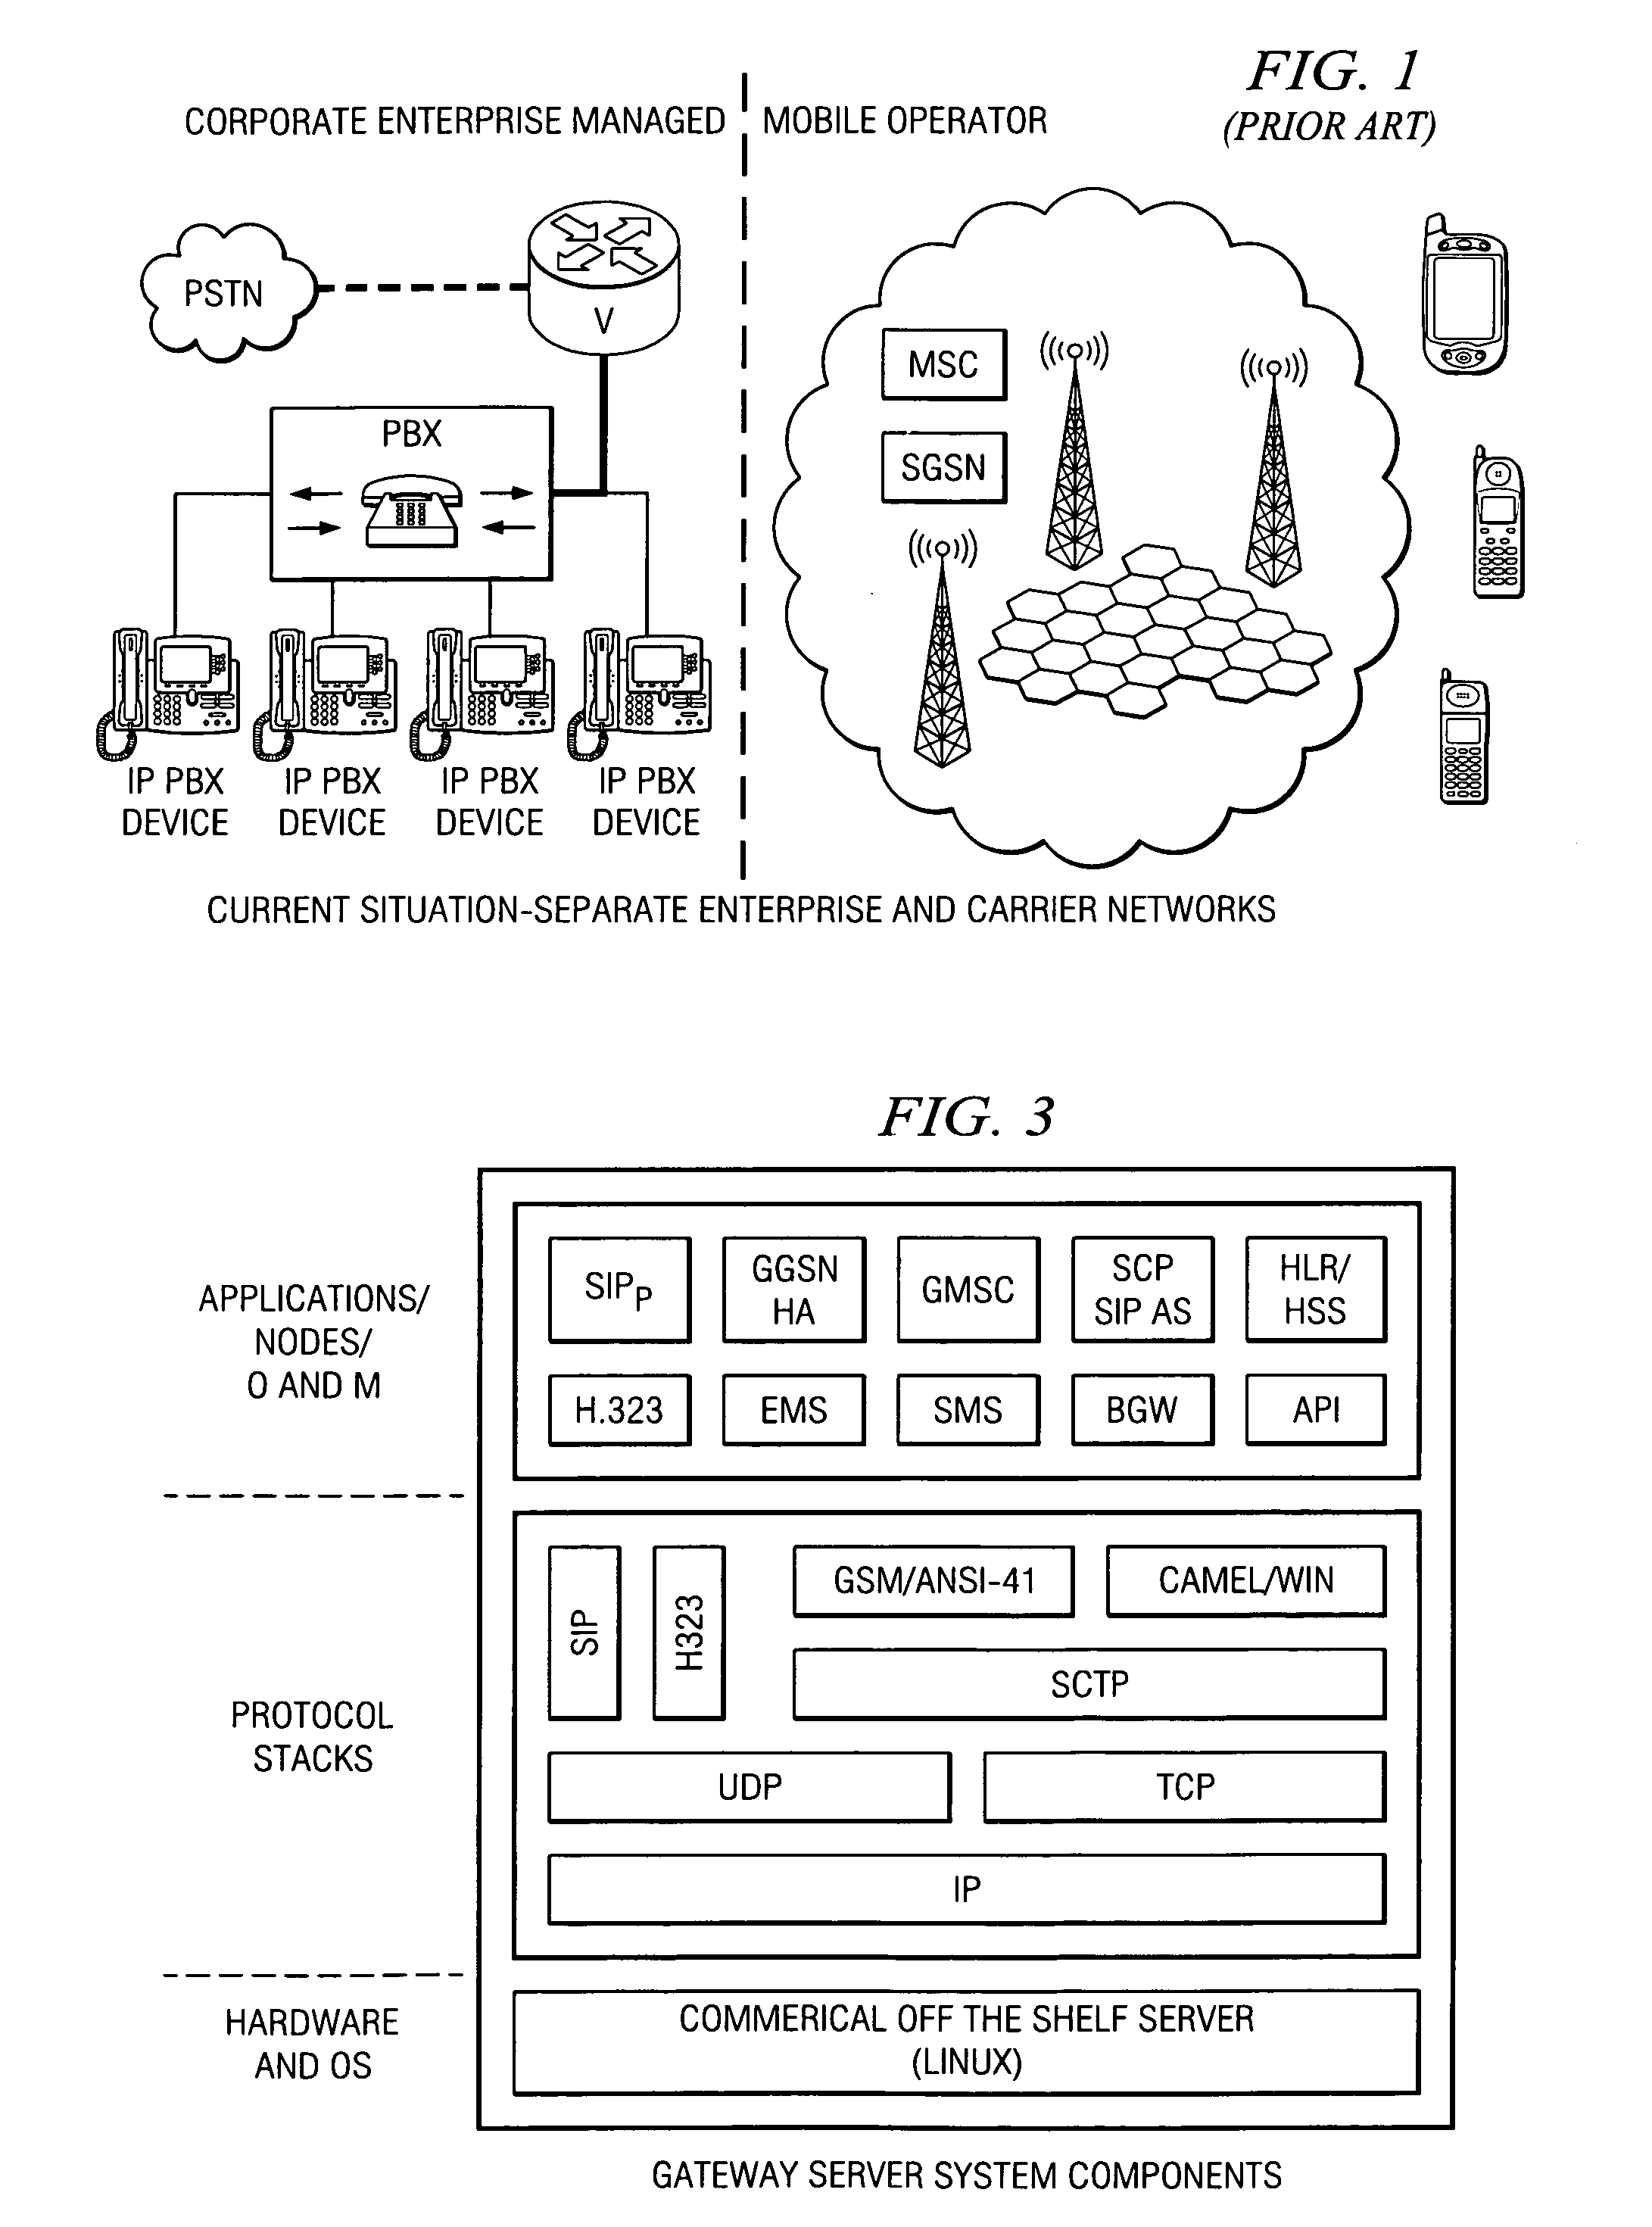 System and method for enabling multi-line mobile telephone service capabilities on a single-line mobile telephone